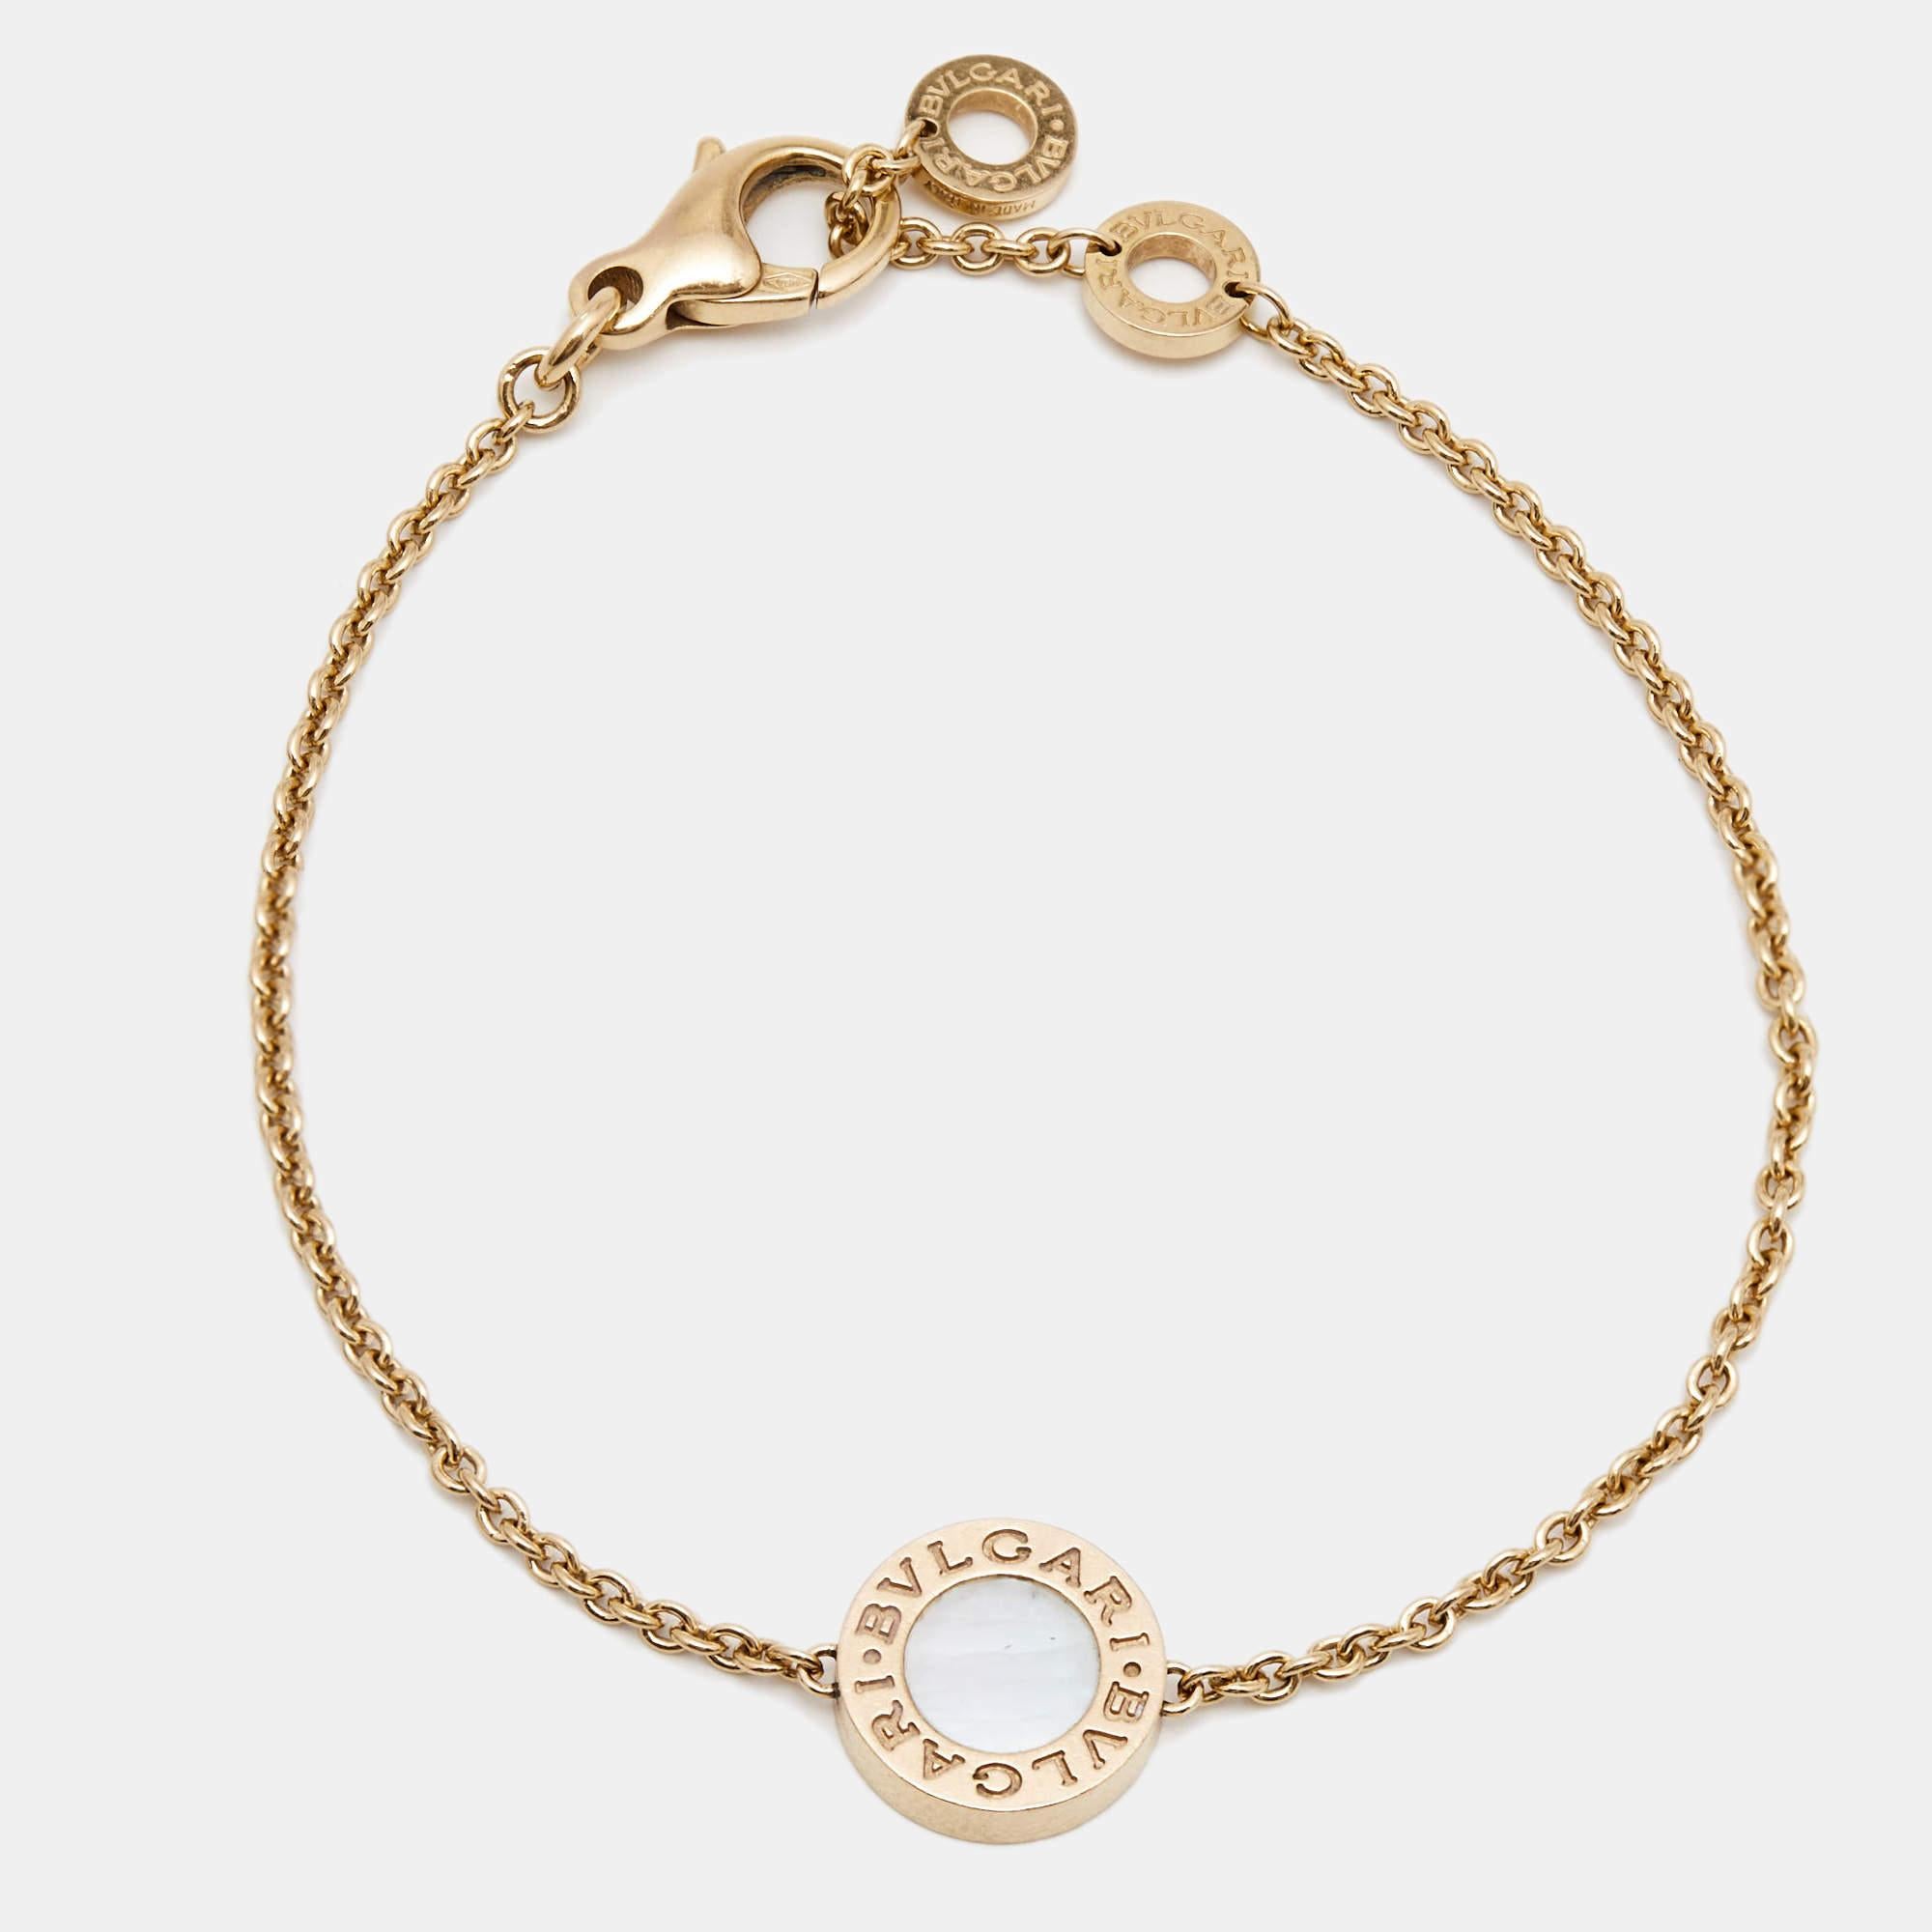 This Bvlgari bracelet speaks beauty with its details. Crafted using 18k rose gold, the Bvlgari Bvlgari bracelet has a circular motif with mother-of-pearl inlay on one side and carnelian on the other side. The piece will be a wonderful style